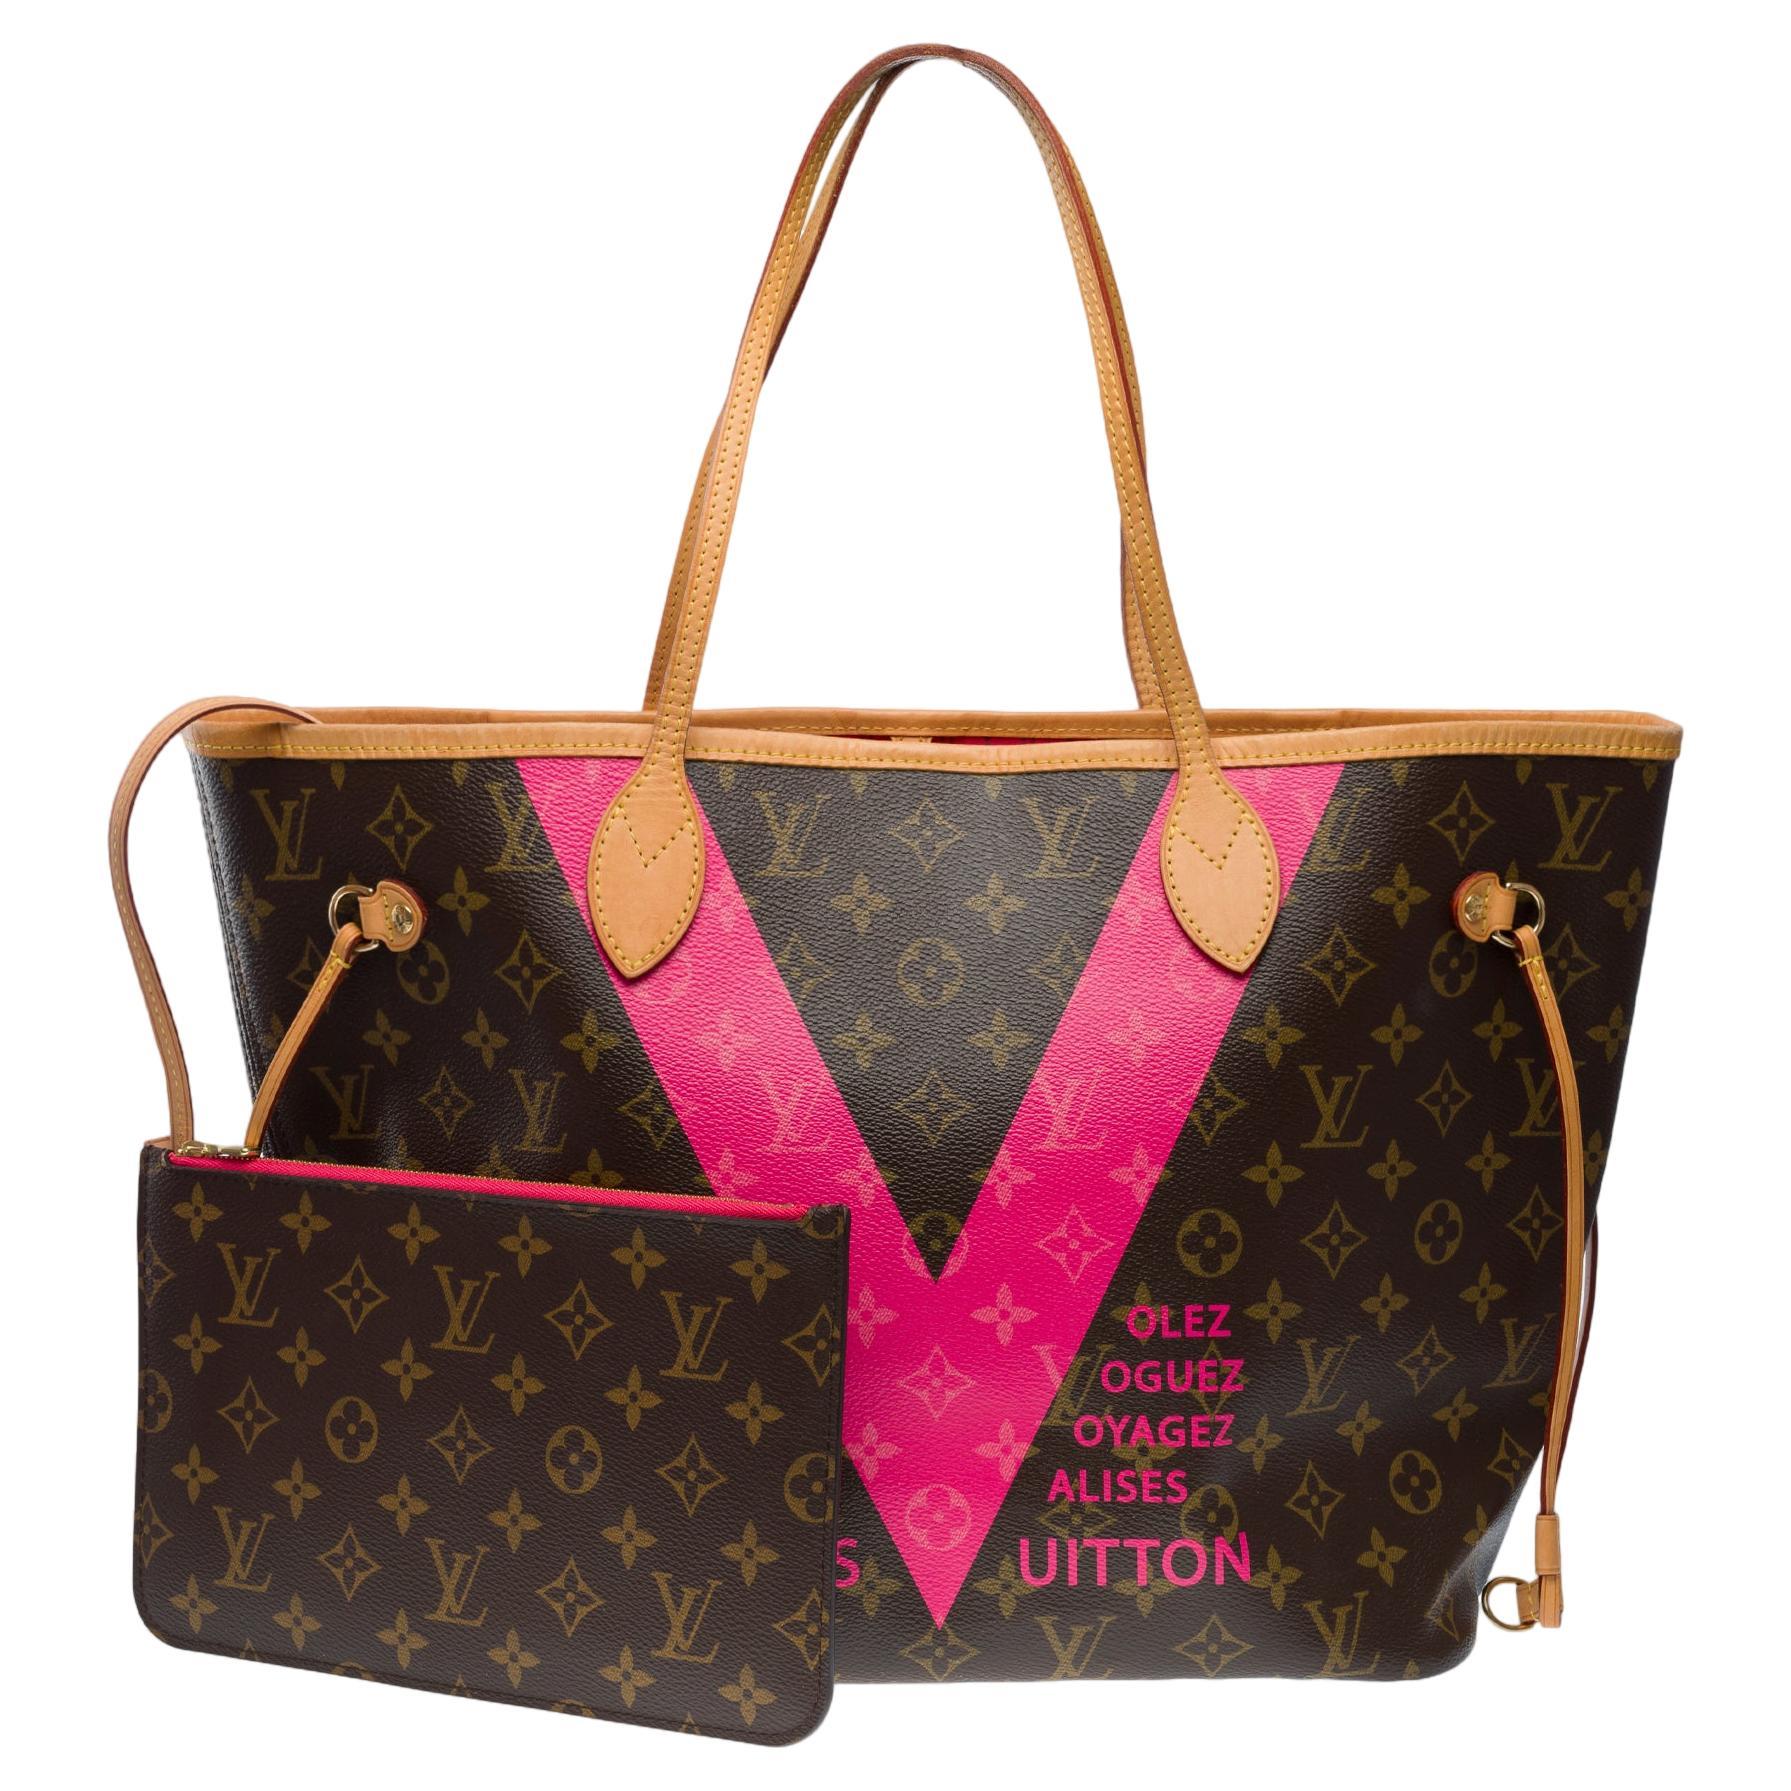 "Saint Tropez" Hot Pink Limited Edition Louis Vuitton Neverfull Tote bag ! For Sale